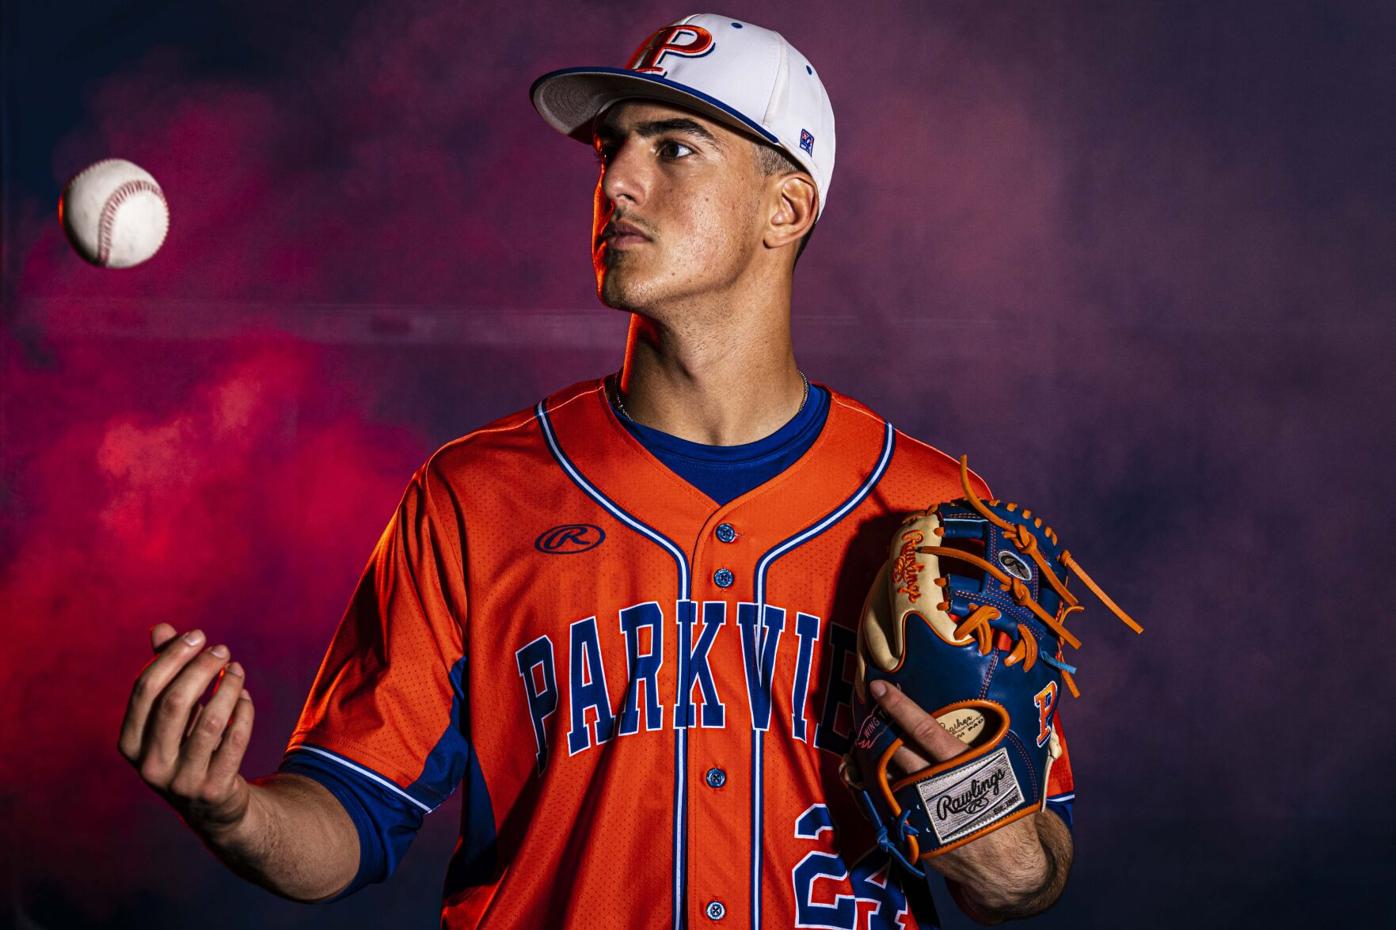 MLB Draft 2015: Astros select Kyle Tucker with No. 5 pick